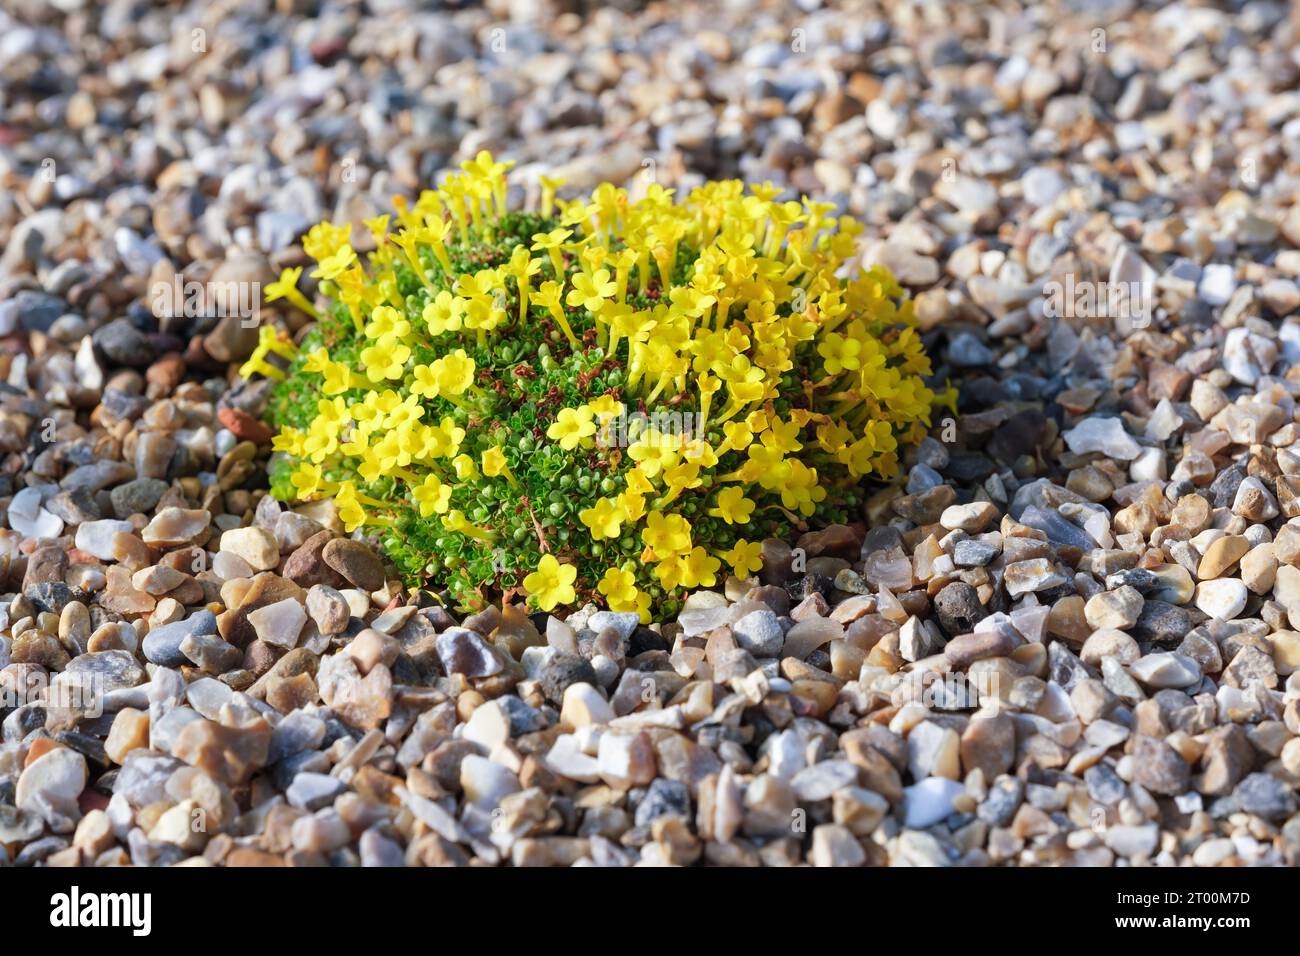 Dionysia tapetodes, small perennial cushion-shaped plant with bright yellow flowers Stock Photo